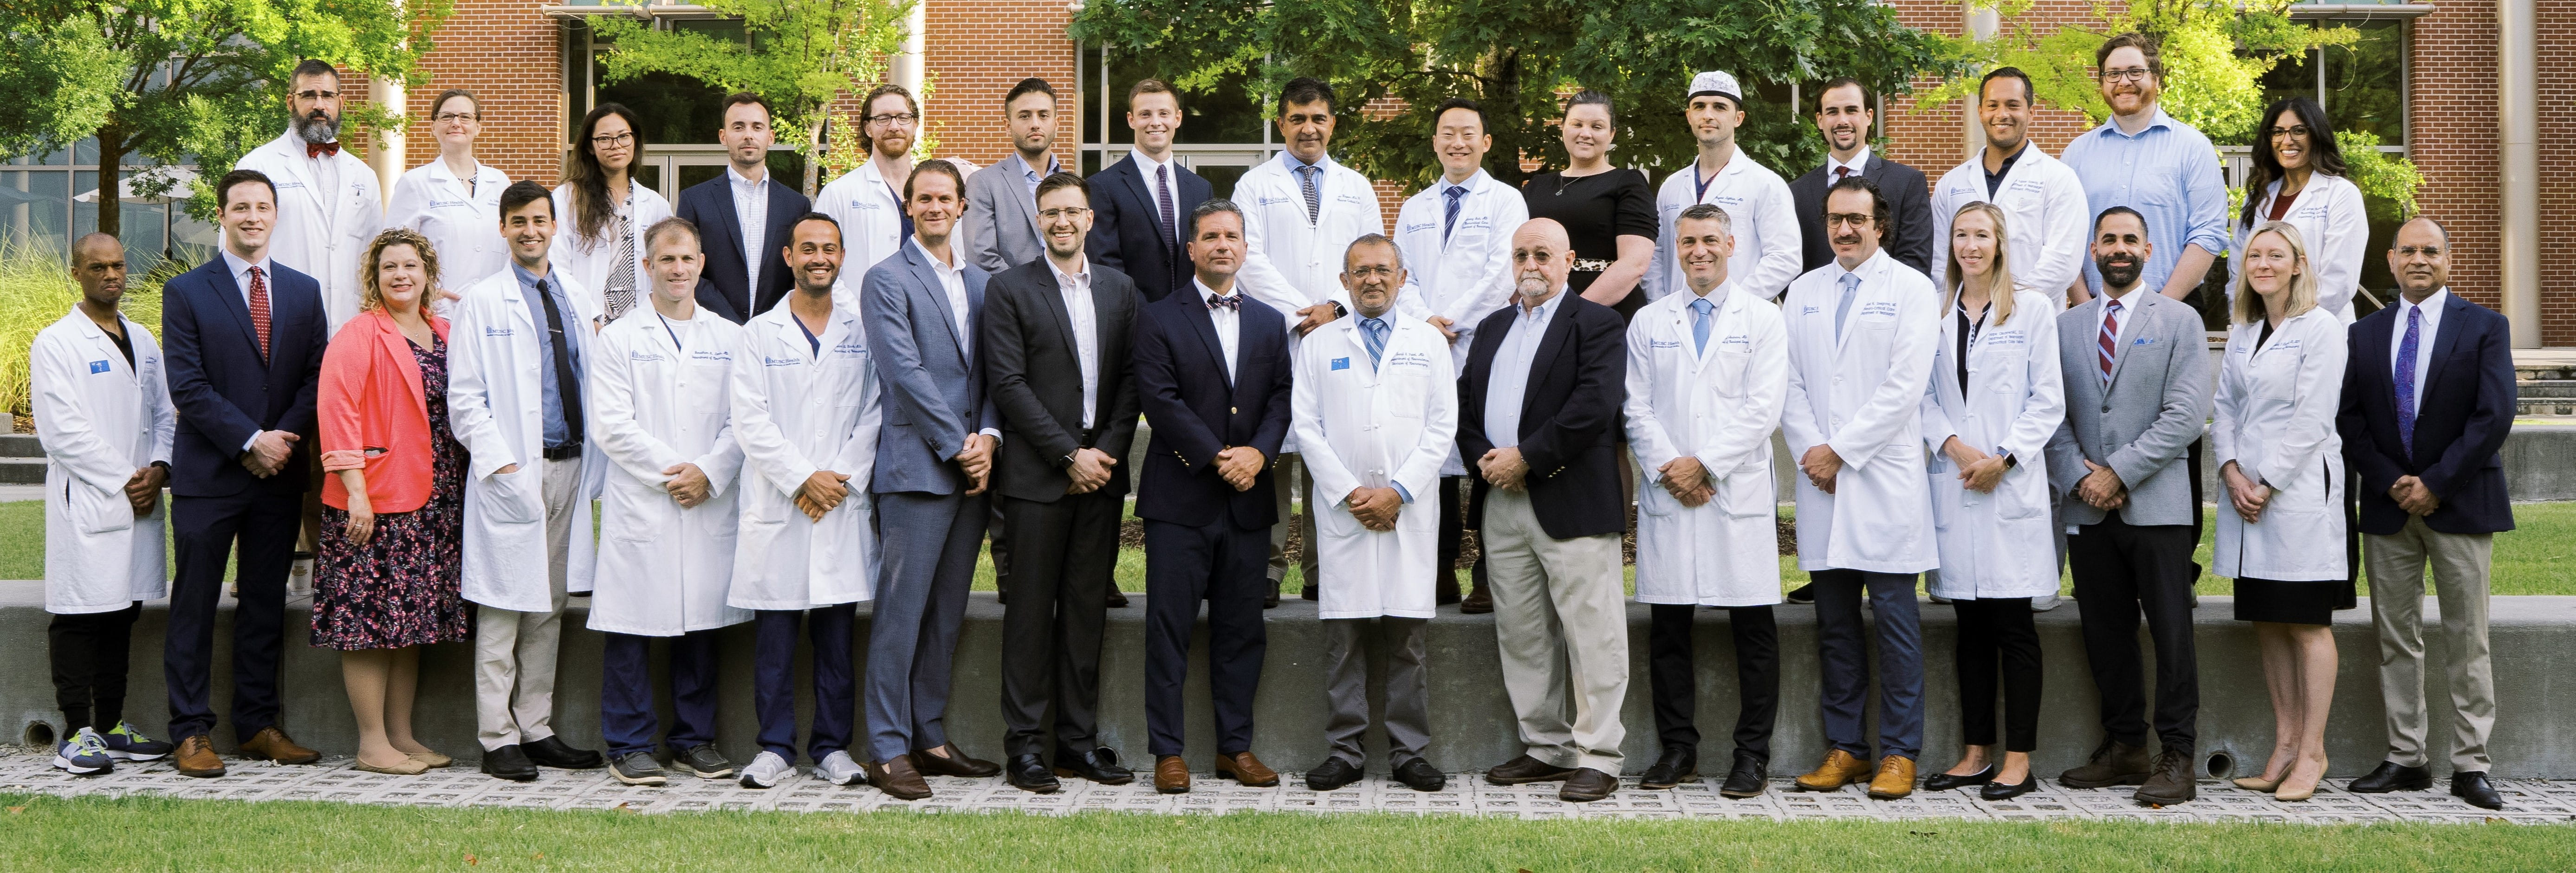 Outside Group Photo: Faculty, Residents, Fellows